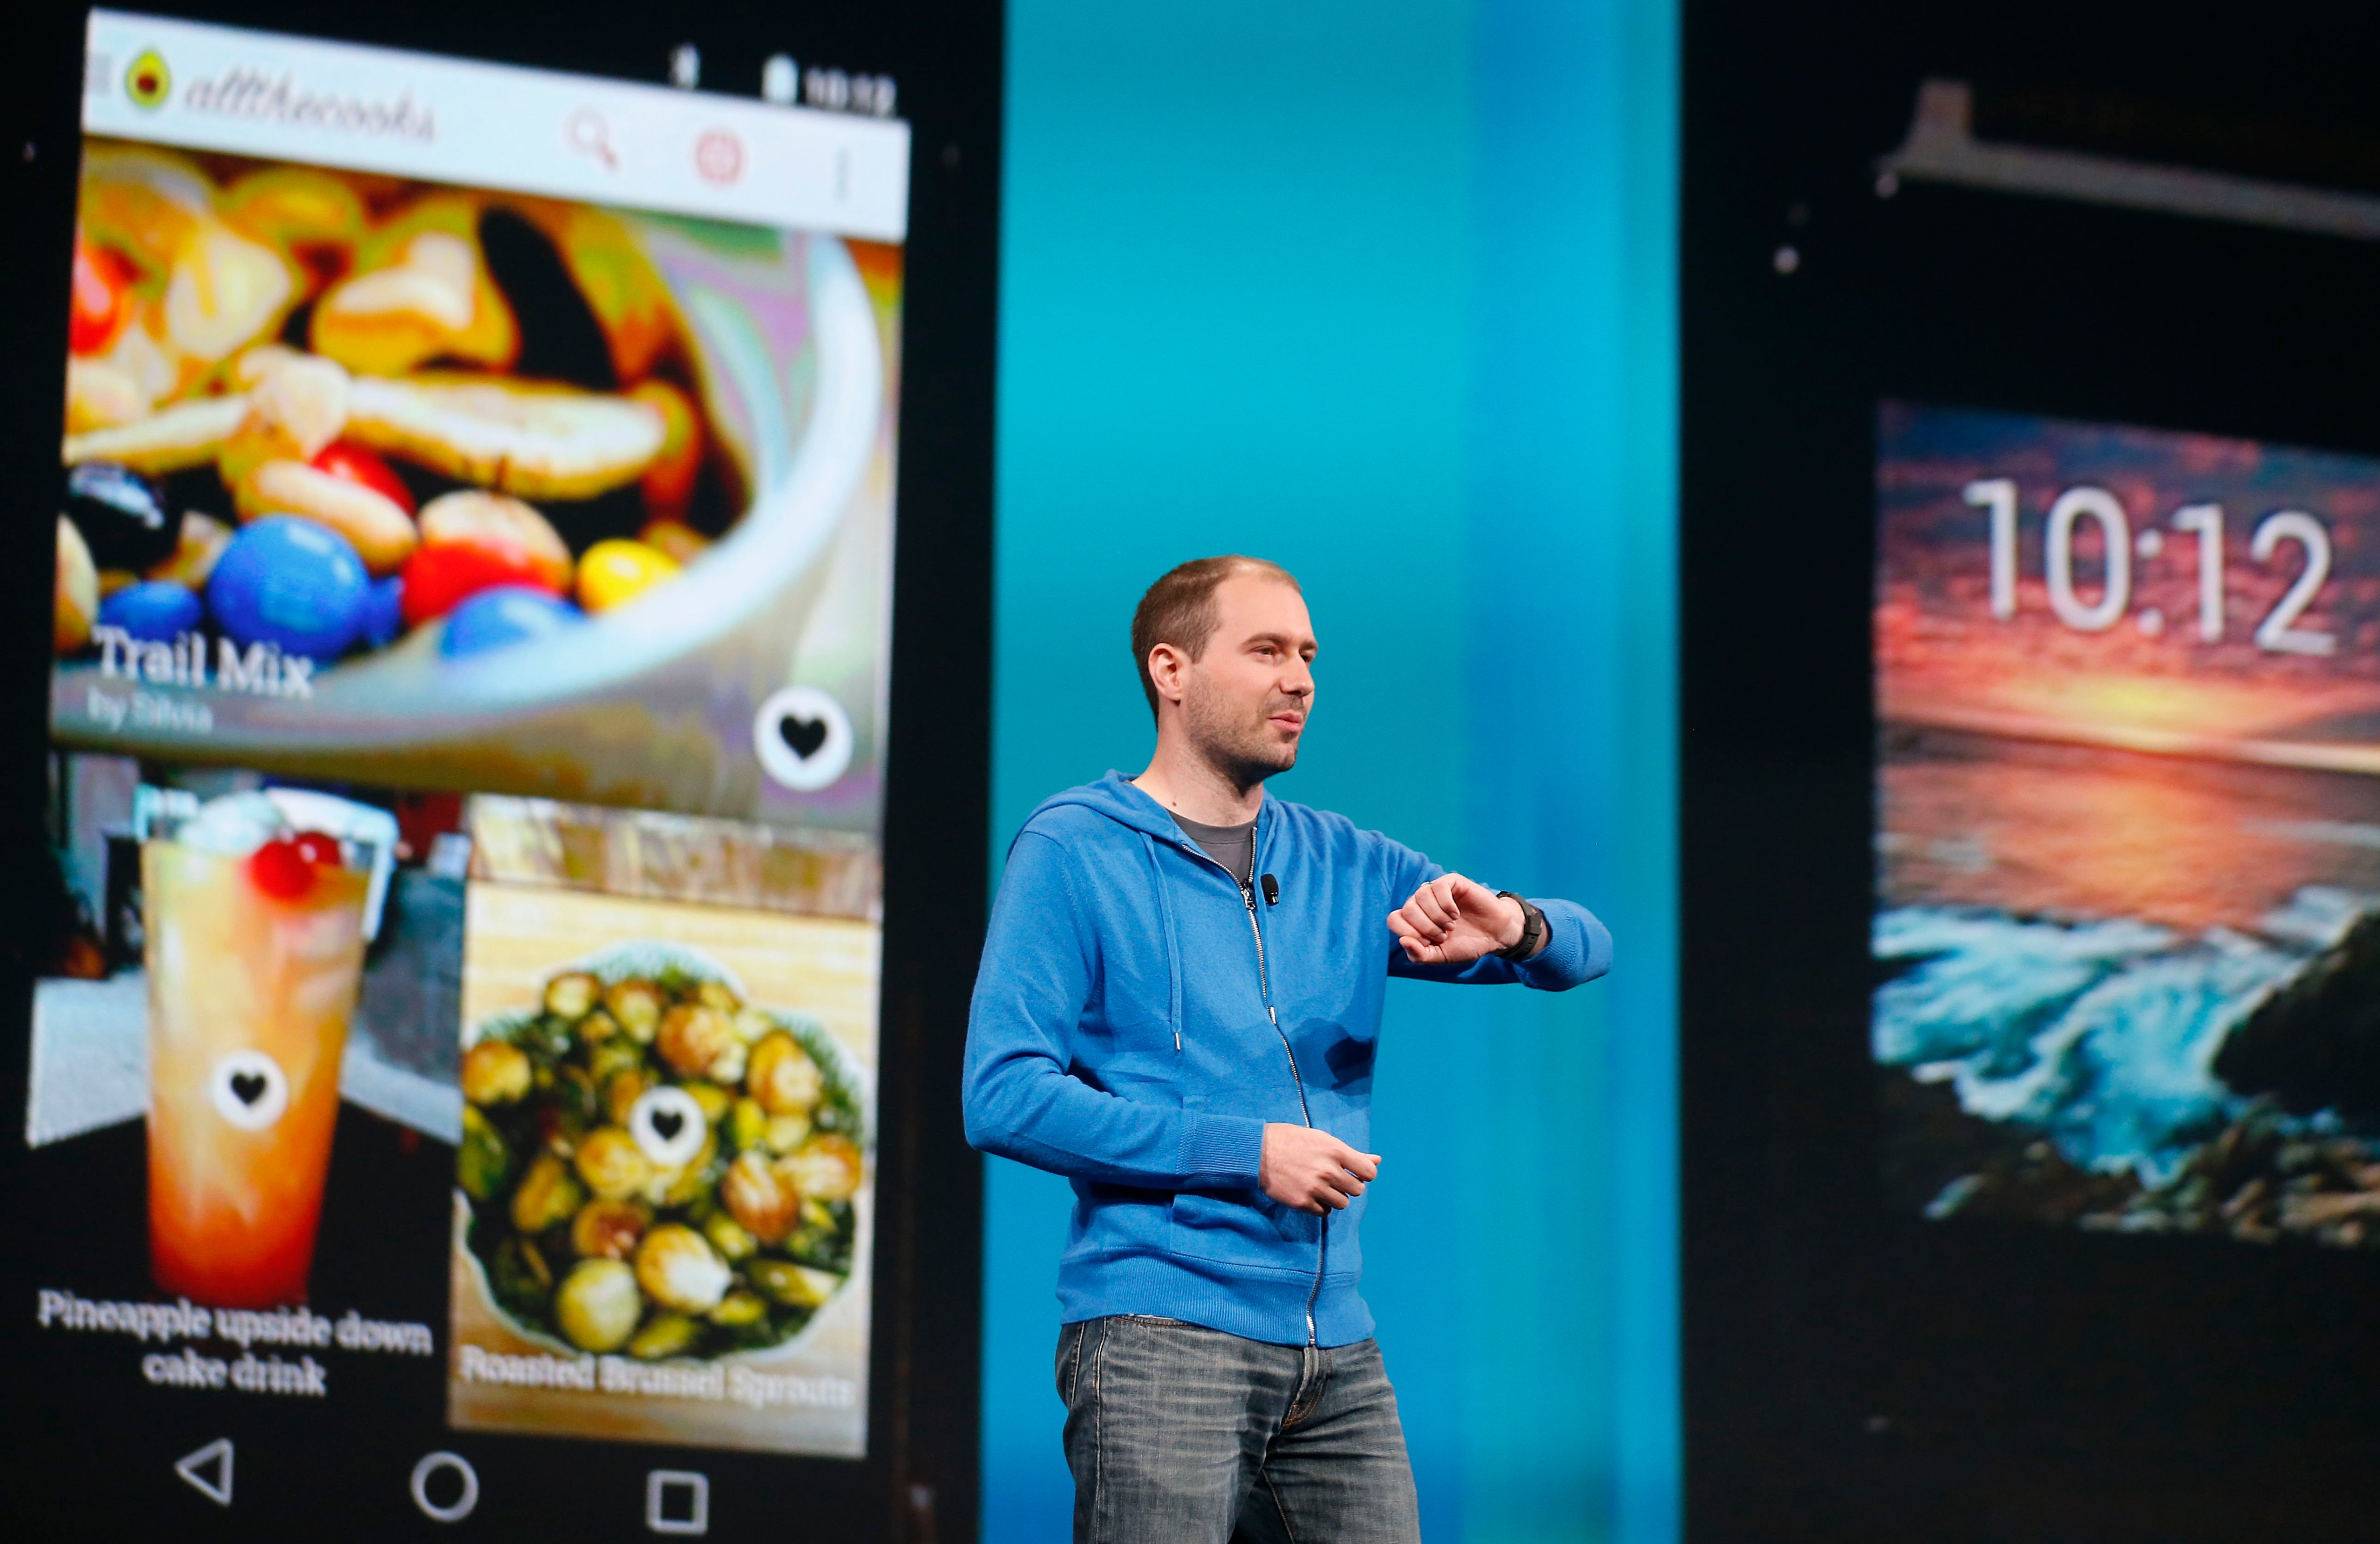 David Singleton, Director of Engineering at Android, introduces LG G Watch during the Google I/O keynote at the the Moscone Center, on Wednesday, June 25, 2014, in San Francisco. (Jed Jacobsohn—LG Electronics/AP)